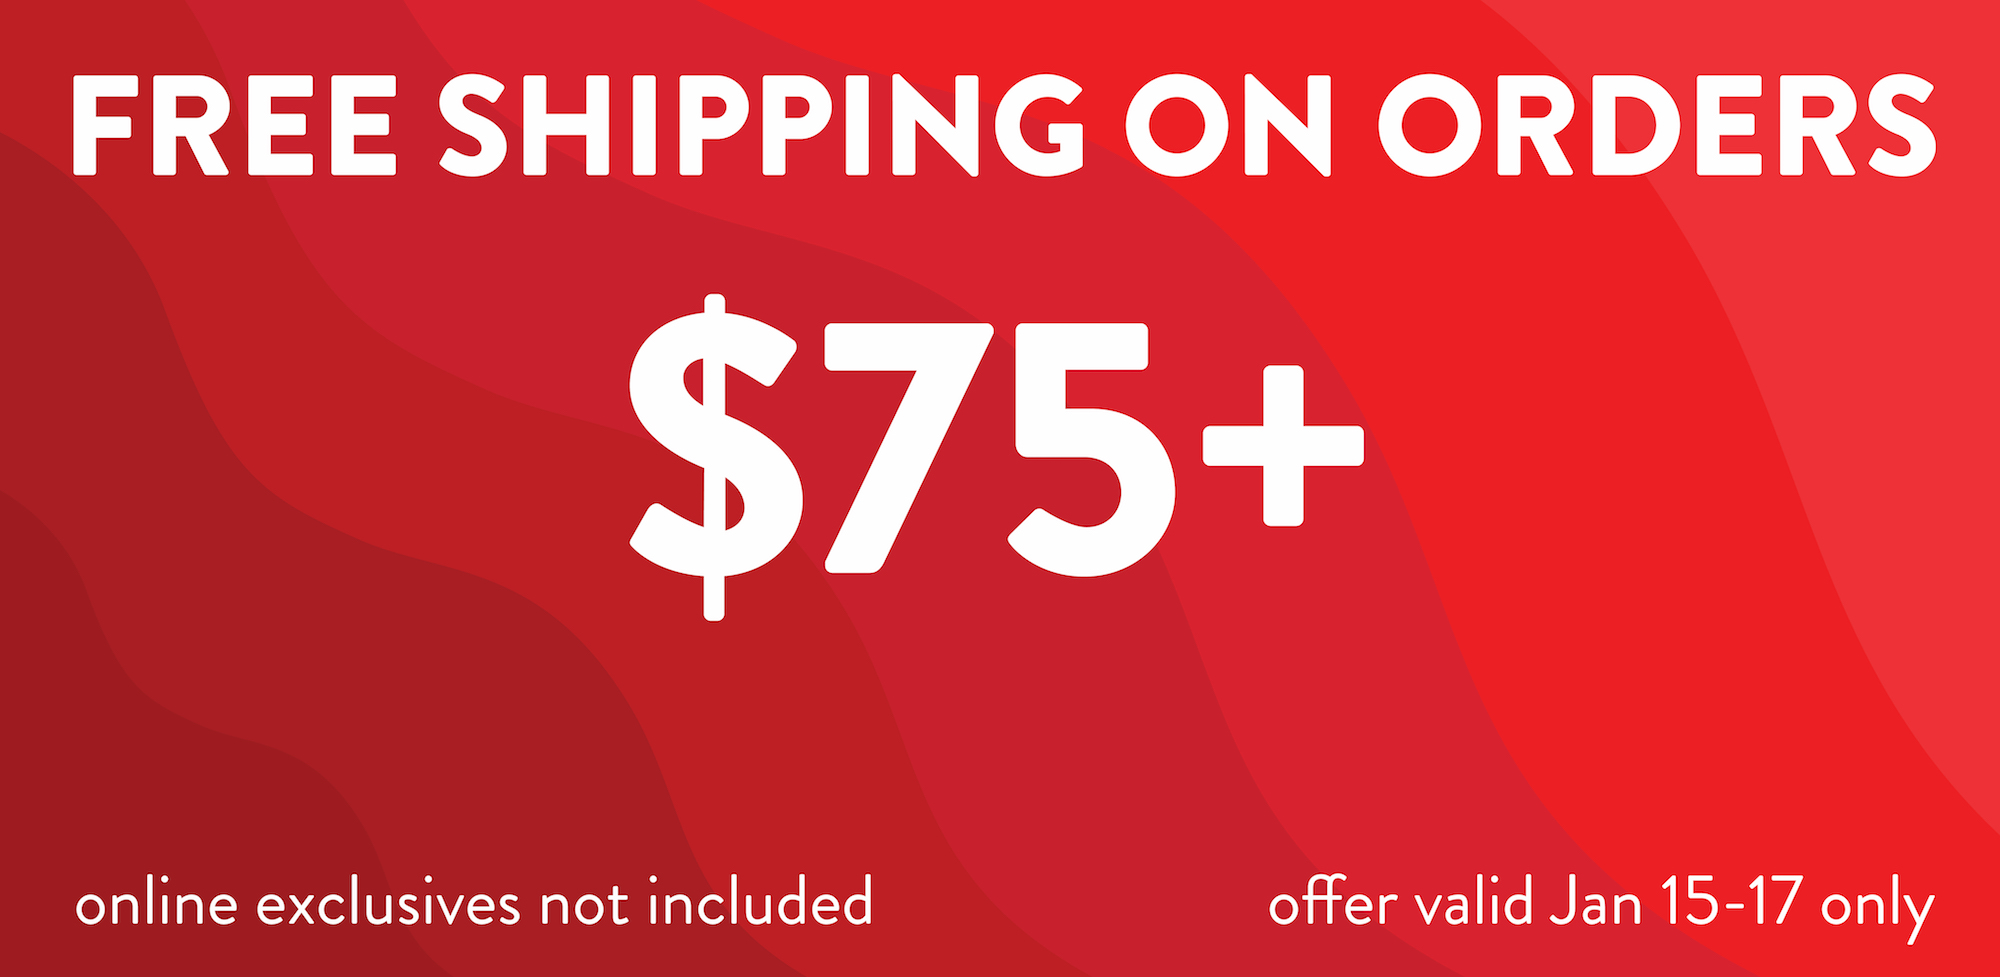 Spend $75 to receive Free Shipping!